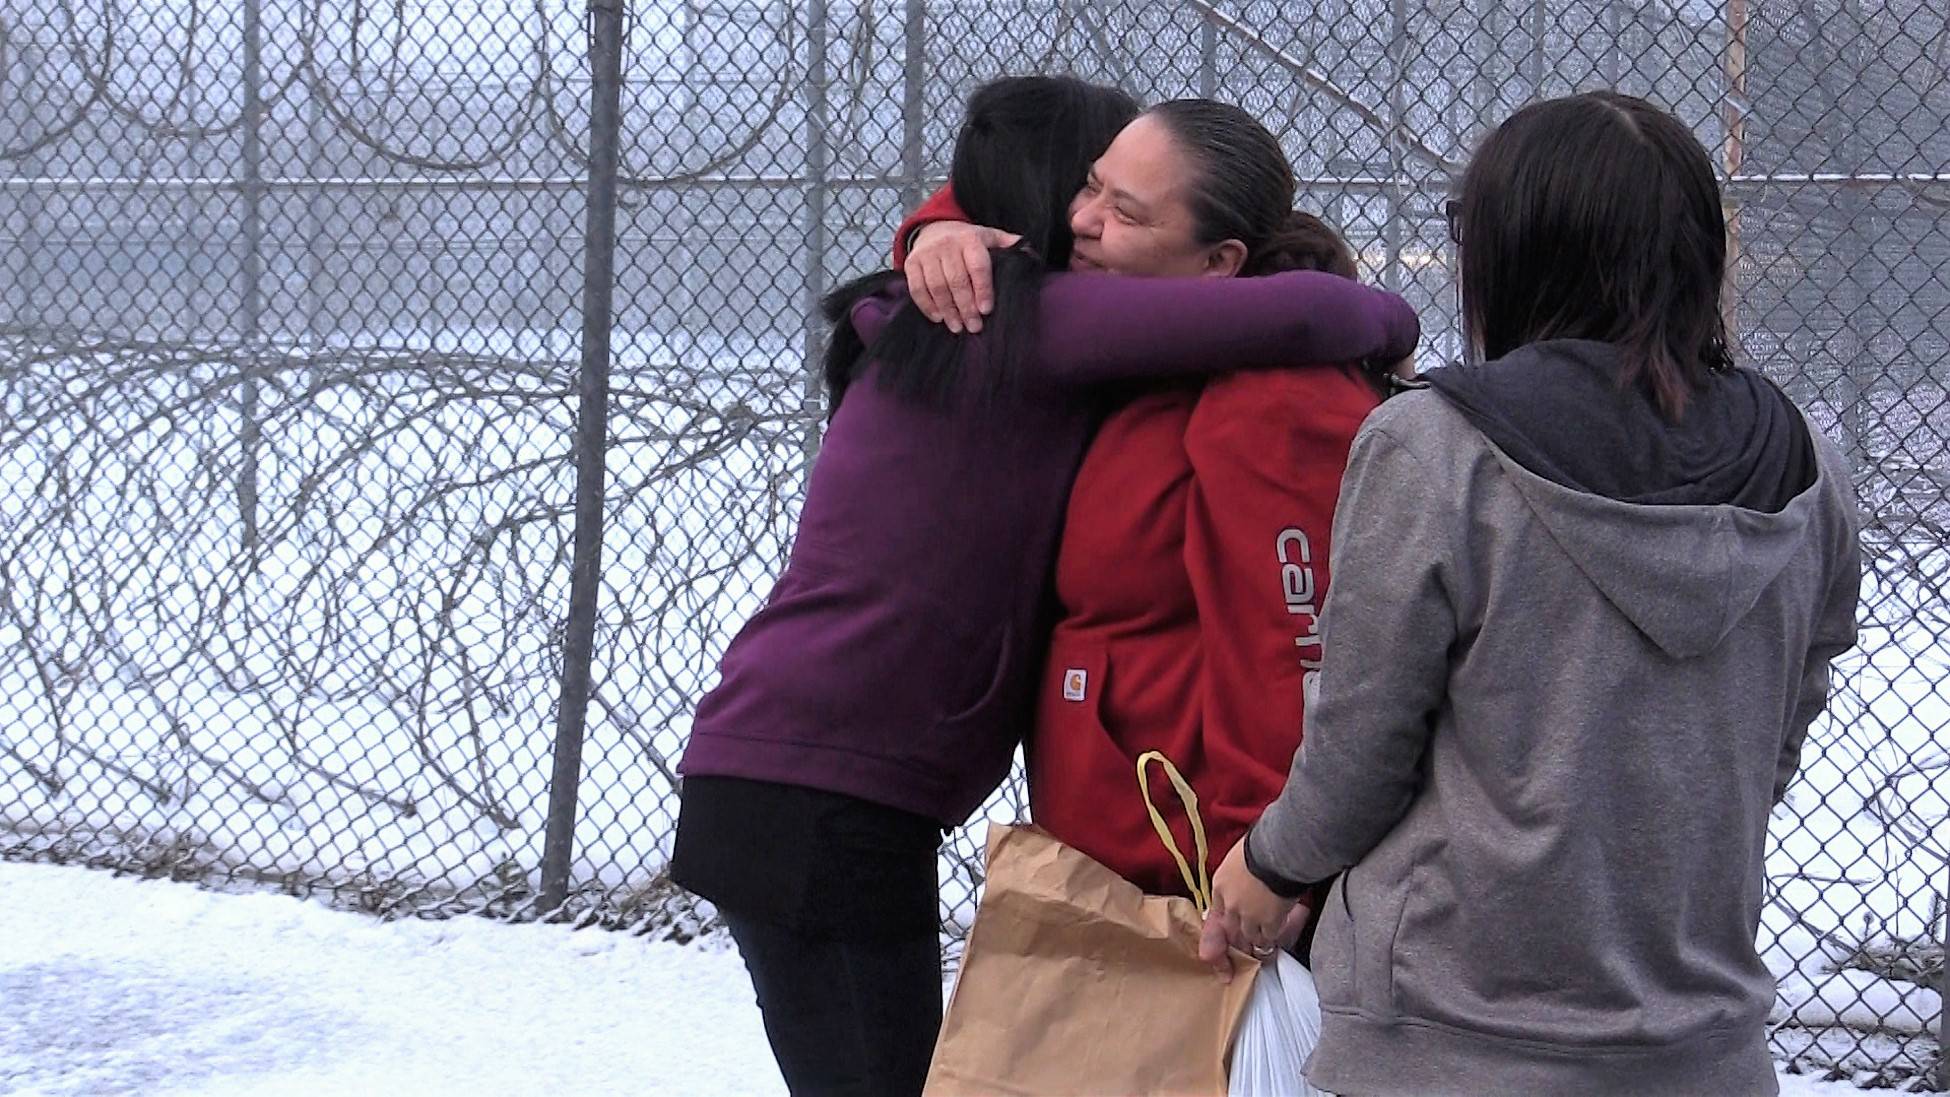 Michelle Bennett, center, is greeted by friends and family members on her release from Lemon Creek Correctional Center. PHOTO COURTESY OF 360 NORTH